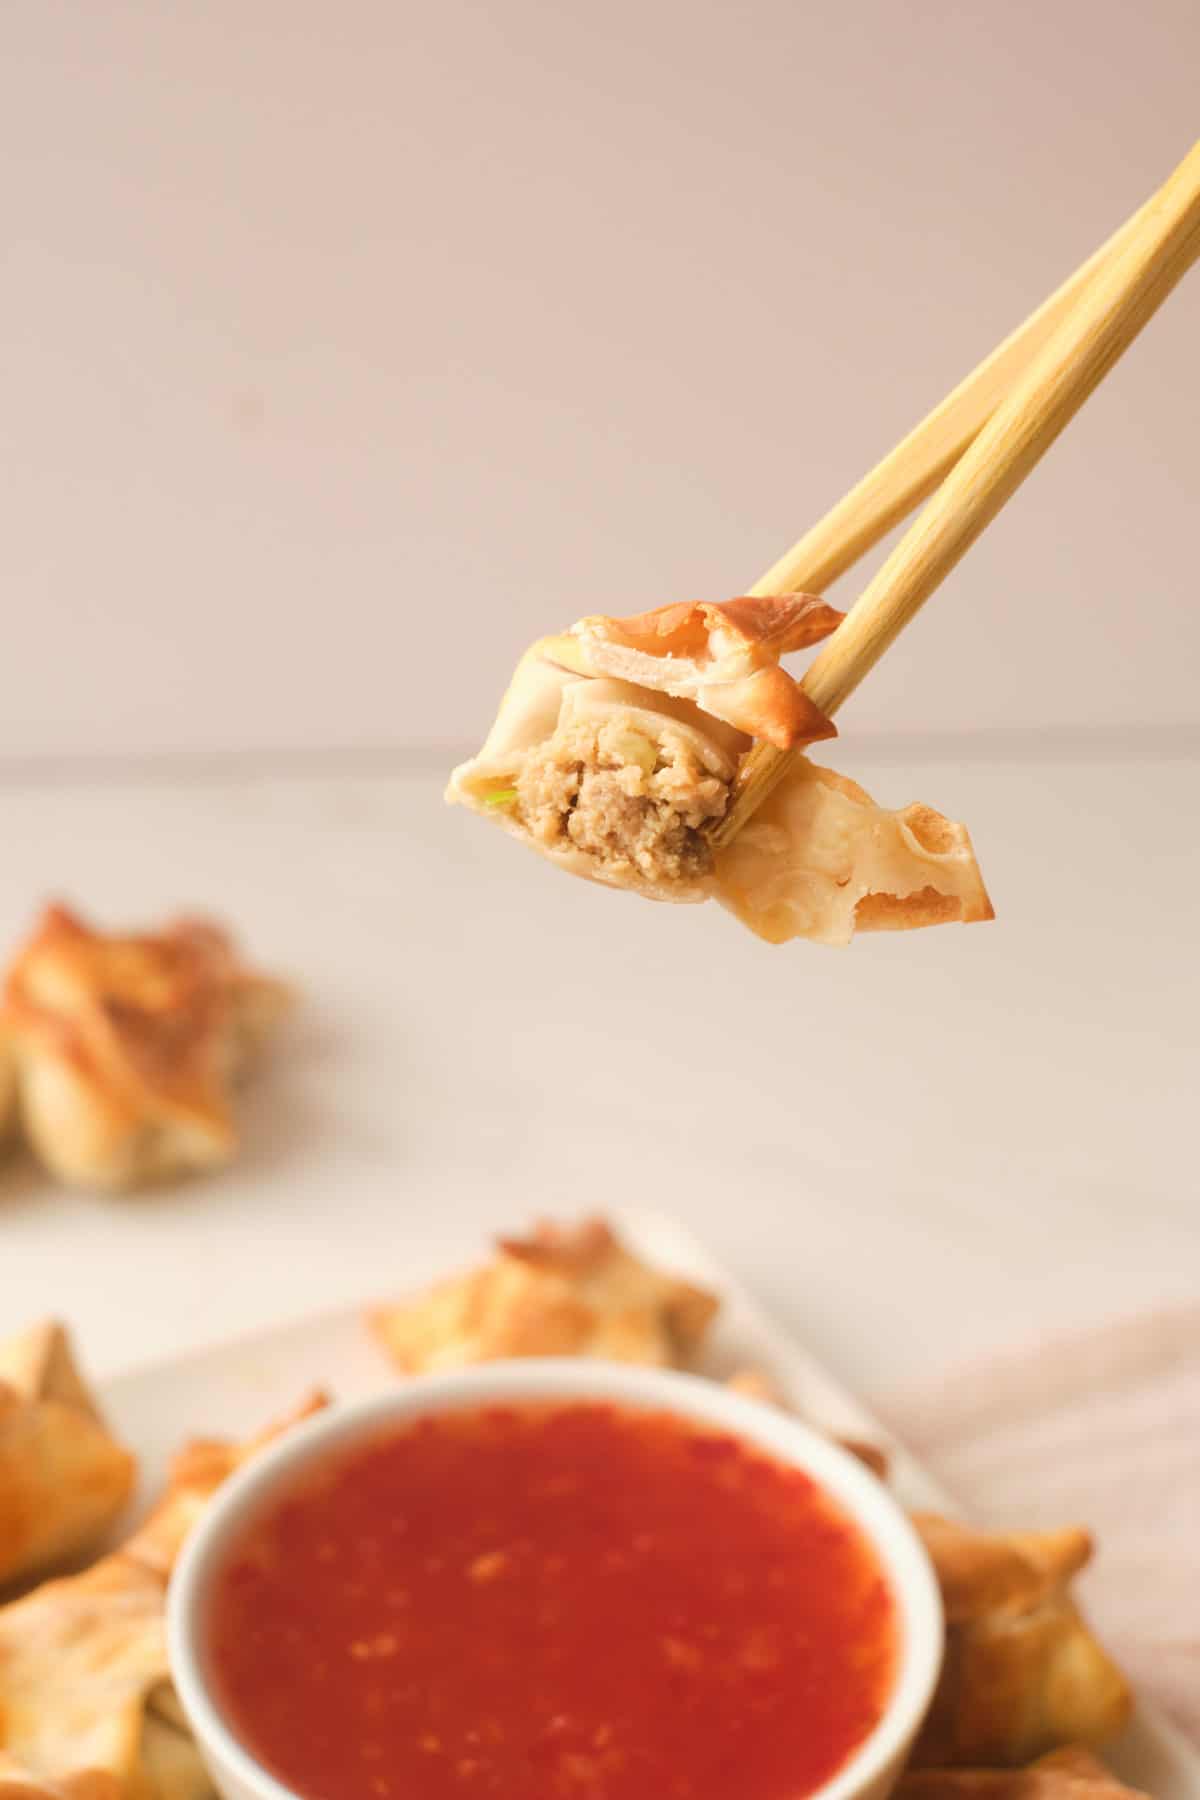 one of the air fryer wontons being dipped into sauce